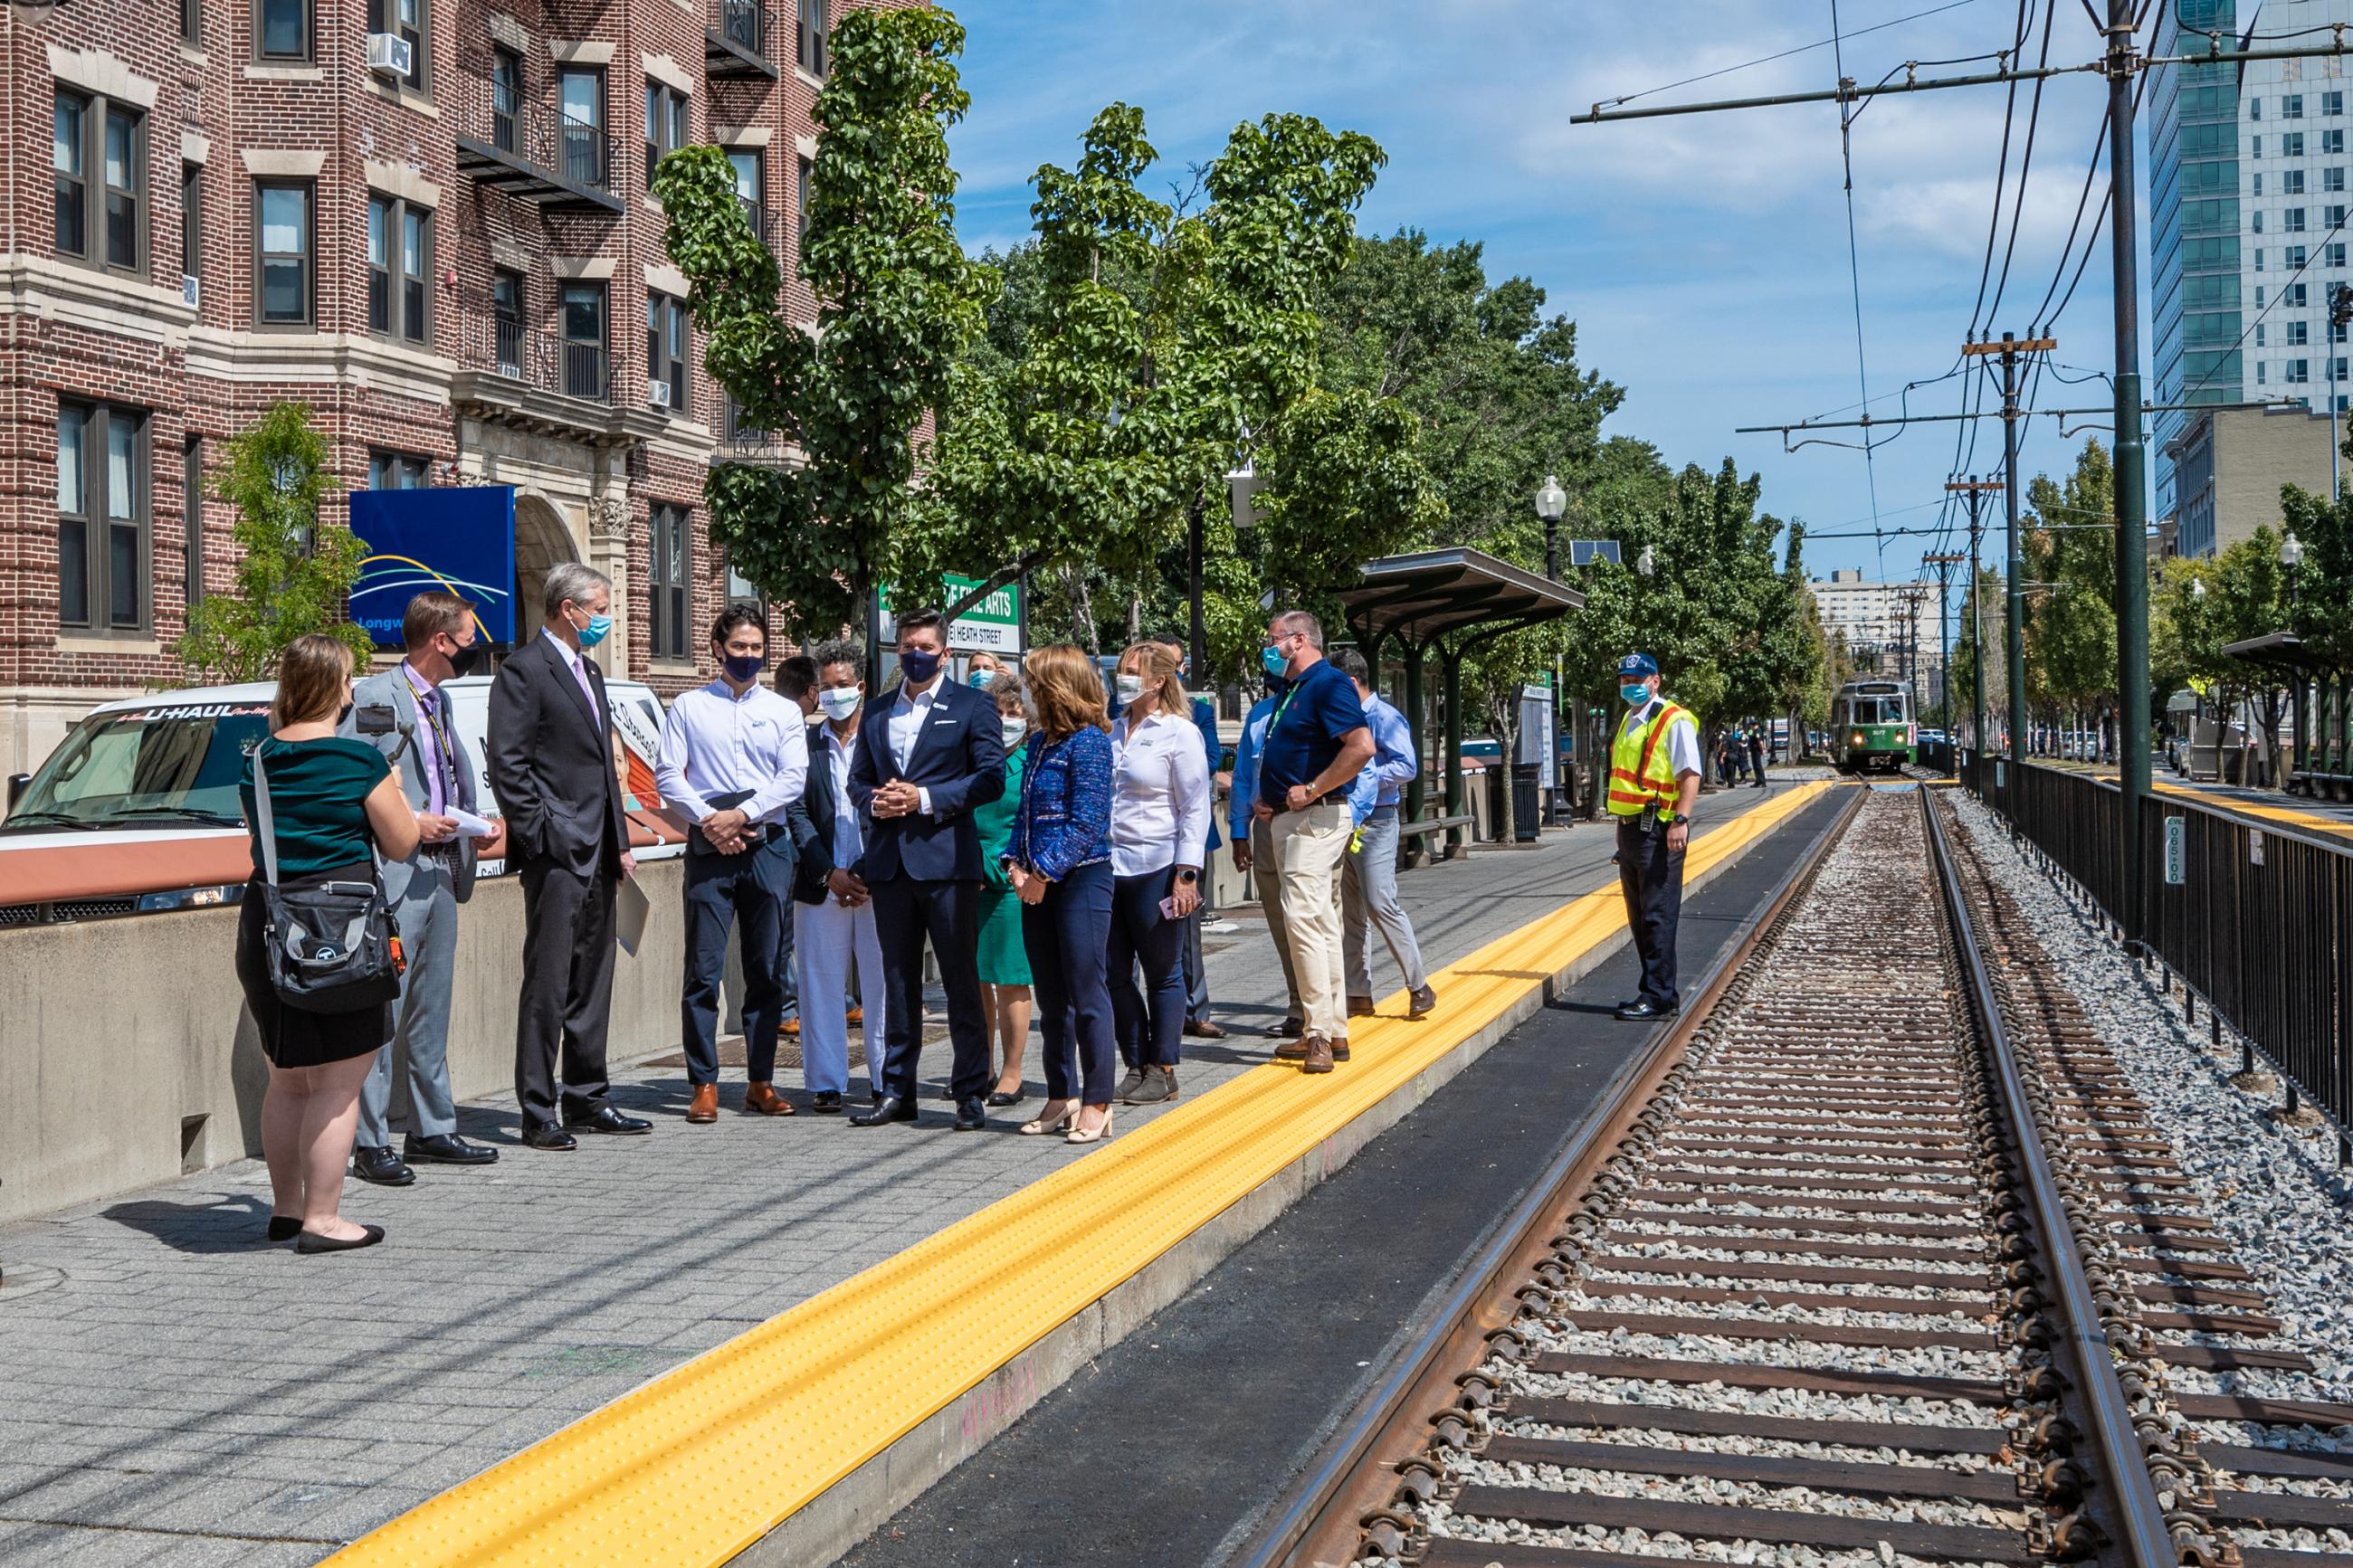 Governor Baker, Lieutenant Governor Polito, MassDOT Secretary Pollack, MBTA General Manager Poftak toured accelerated Green Line E Branch work at Museum of Fine Arts Station led by the MBTA’s Green Line Transformation Team.